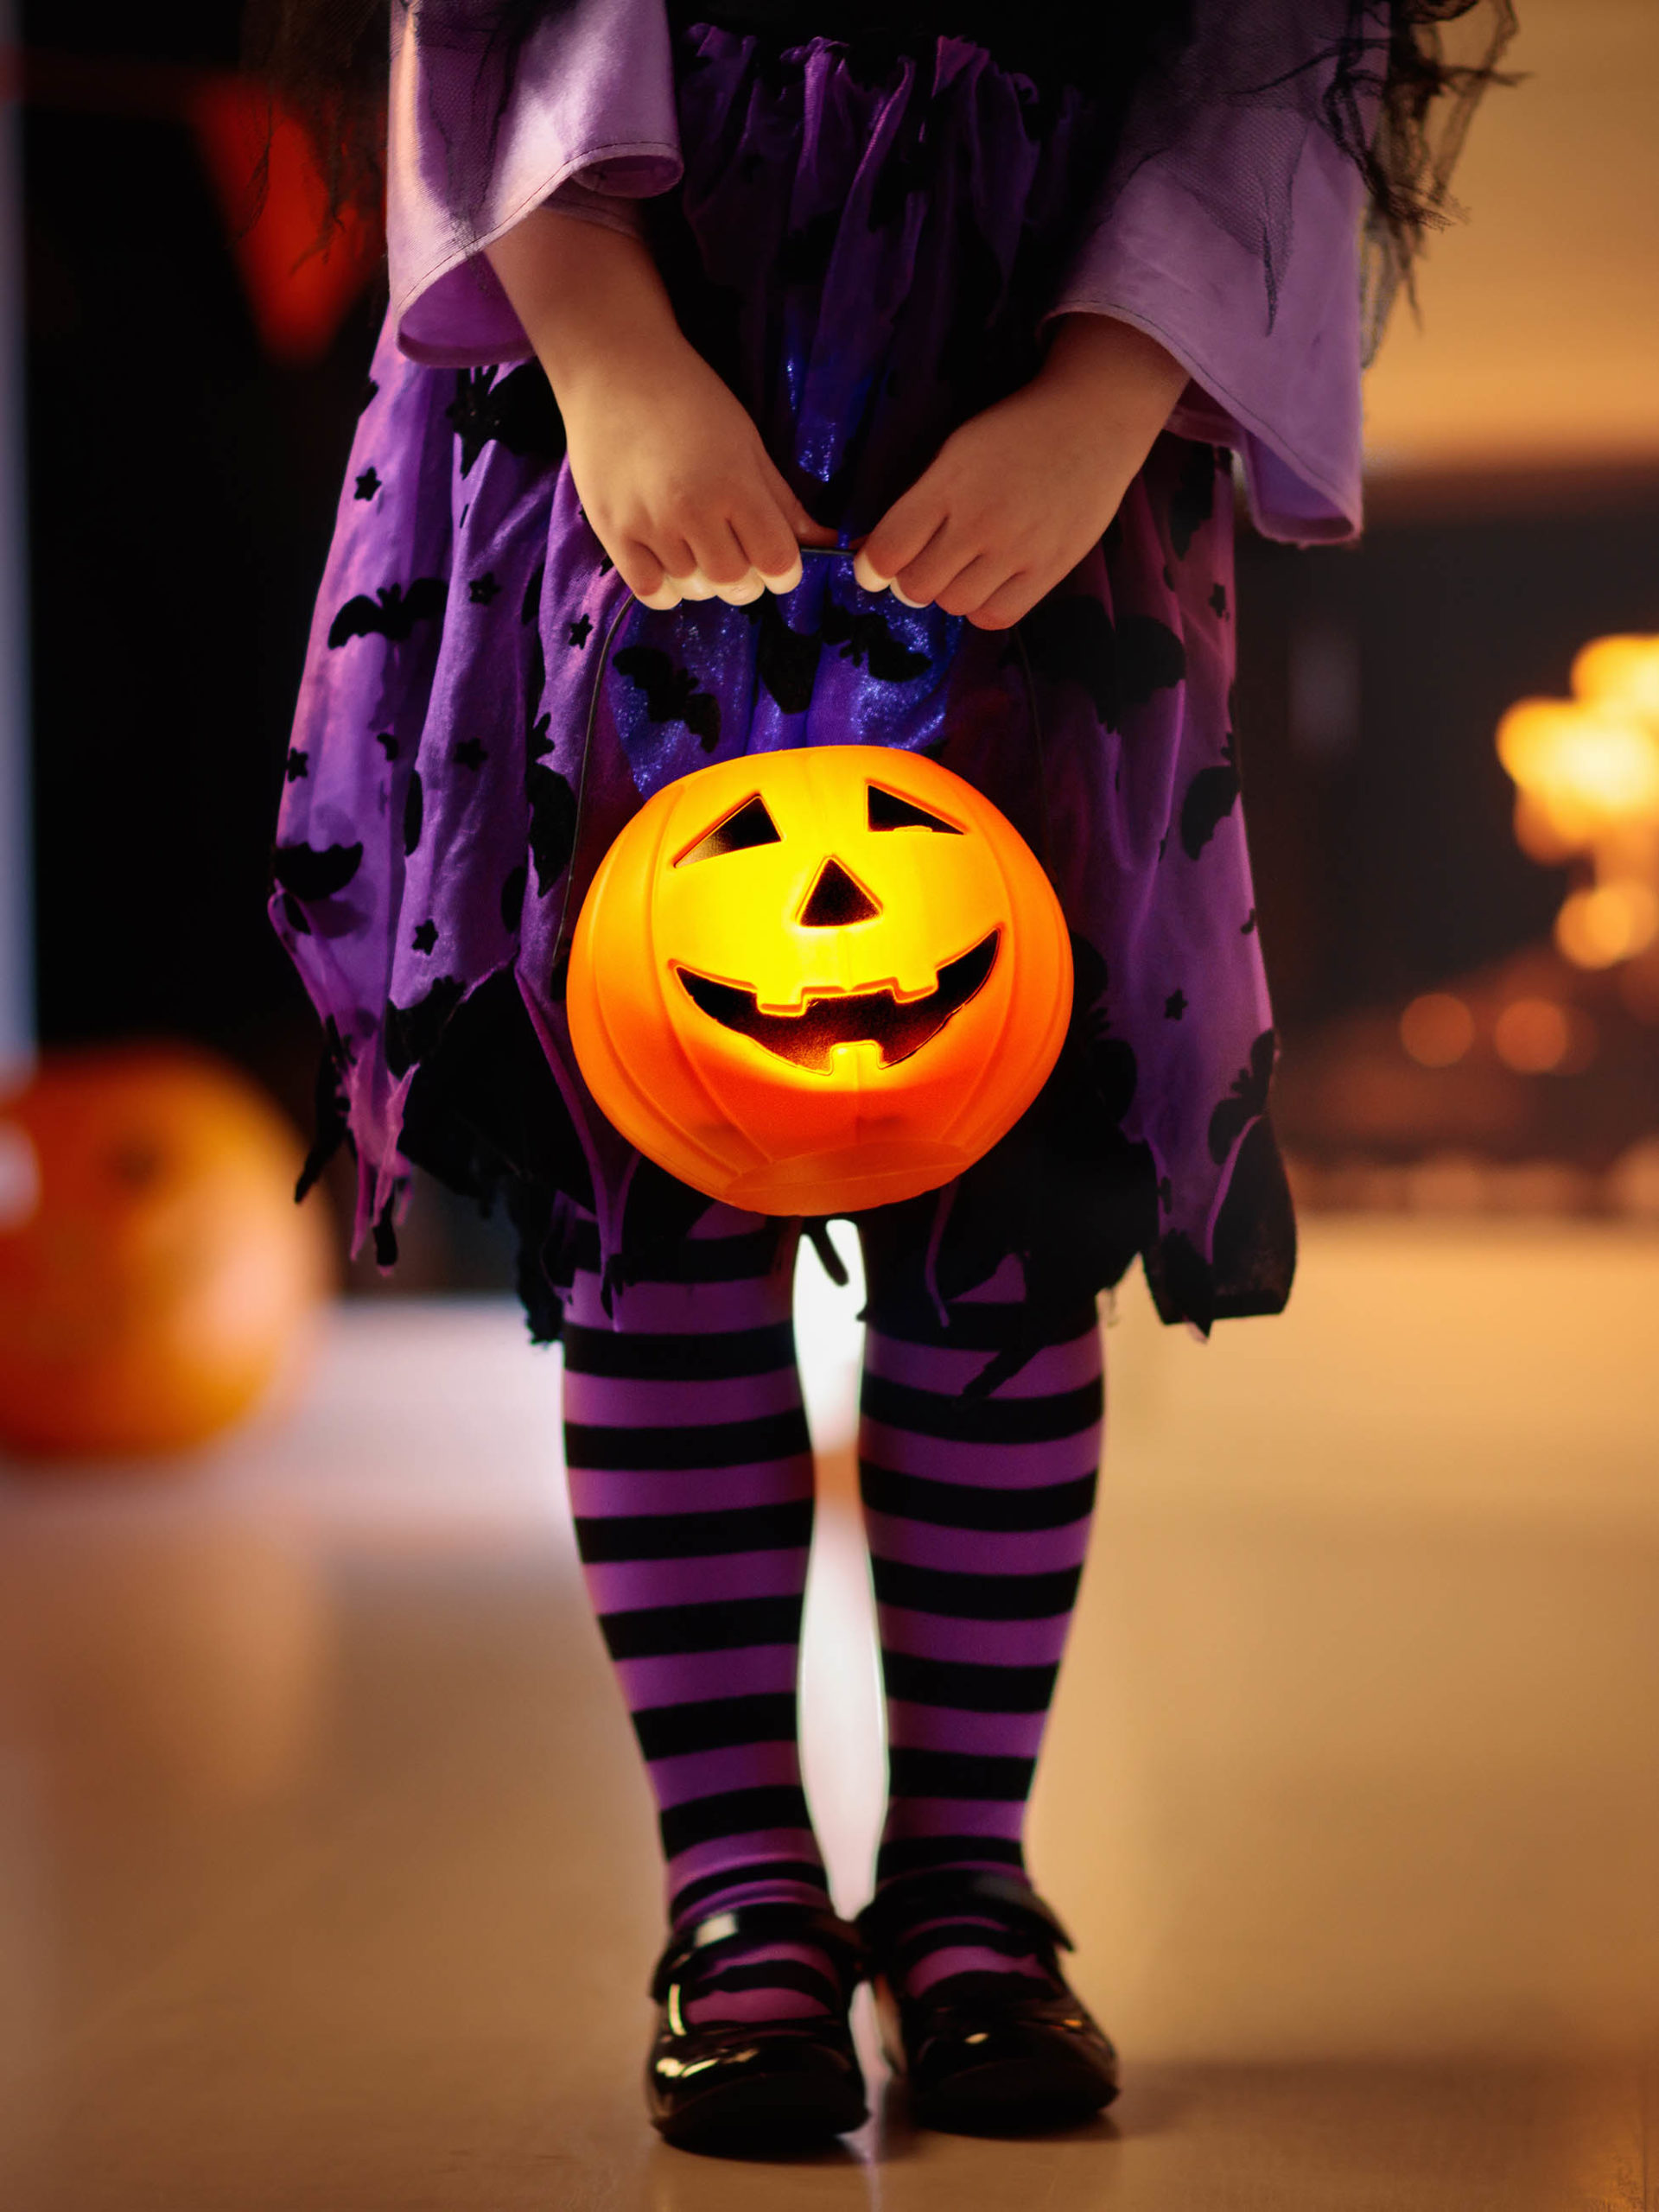 girl in witch costume on Halloween holding candy bucket